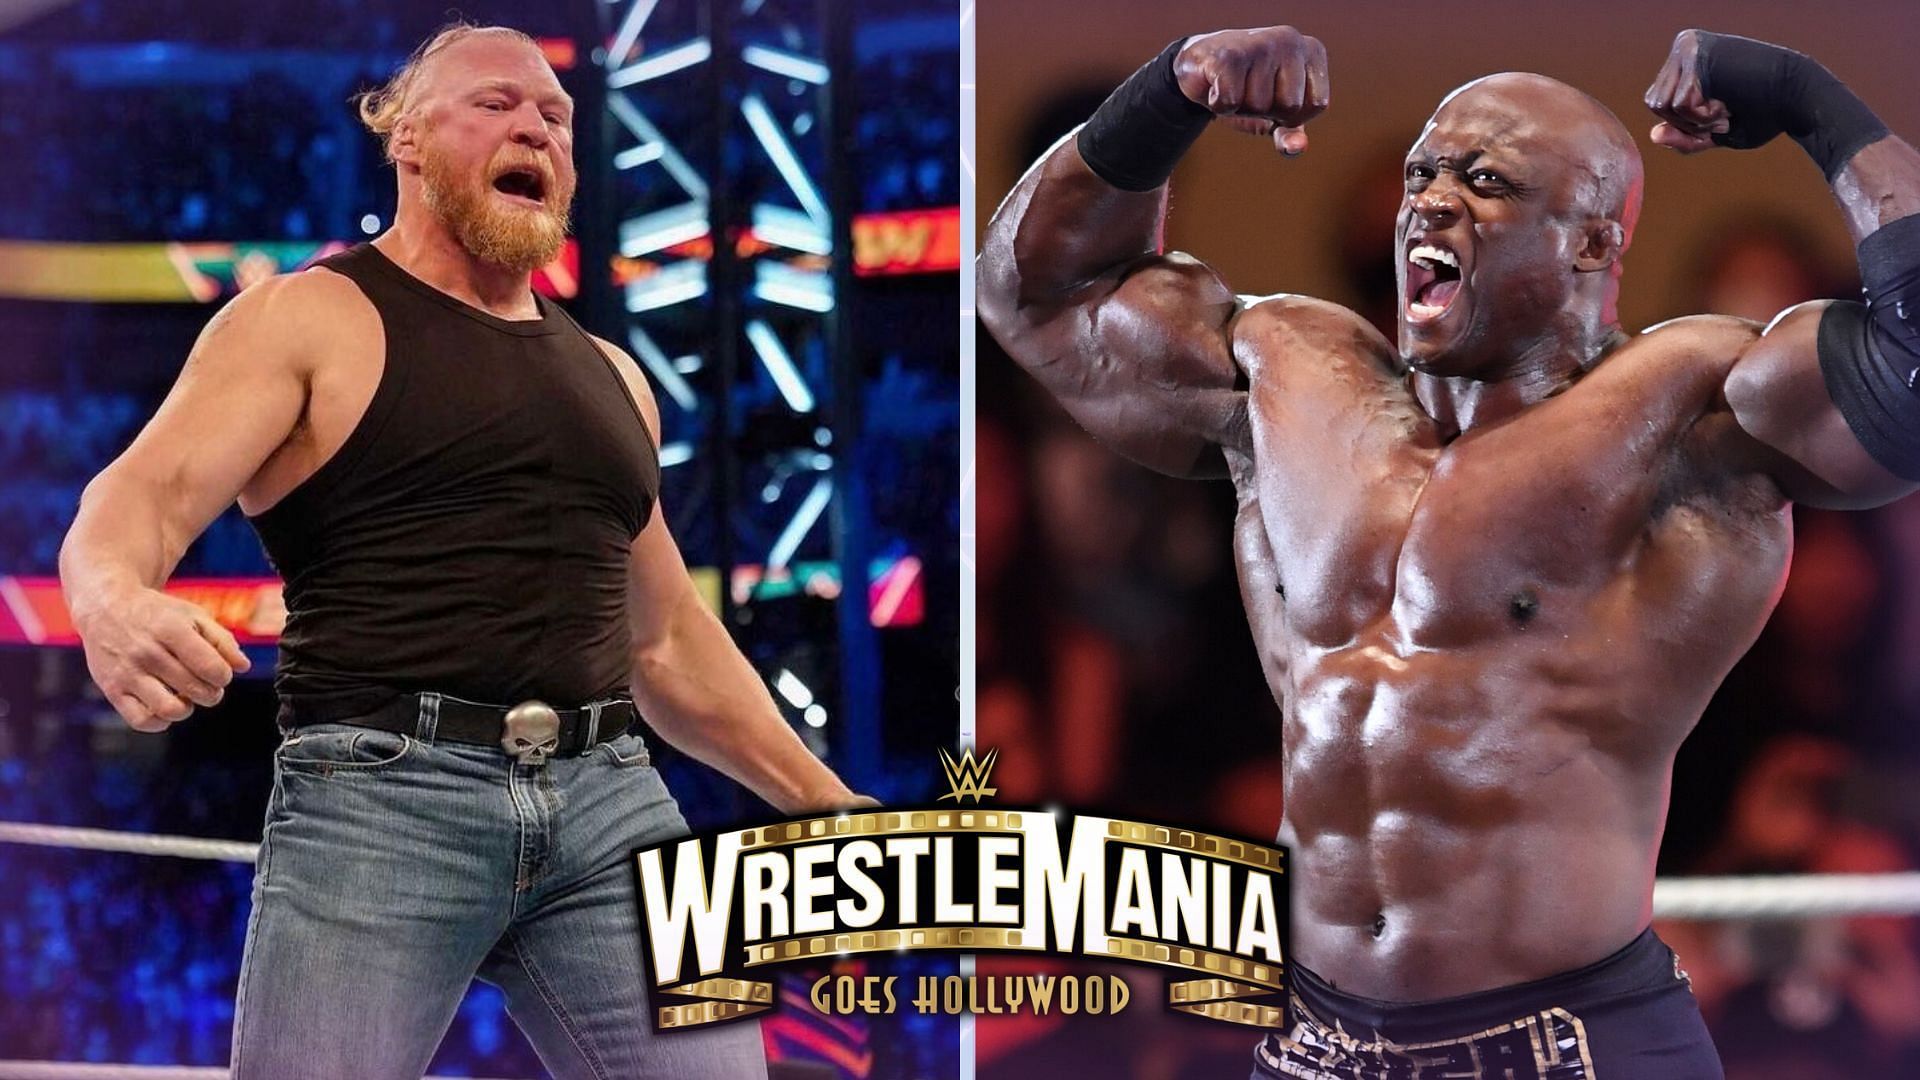 Brock Lesnar vs. Bobby Lashley was speculated for WrestleMania 39